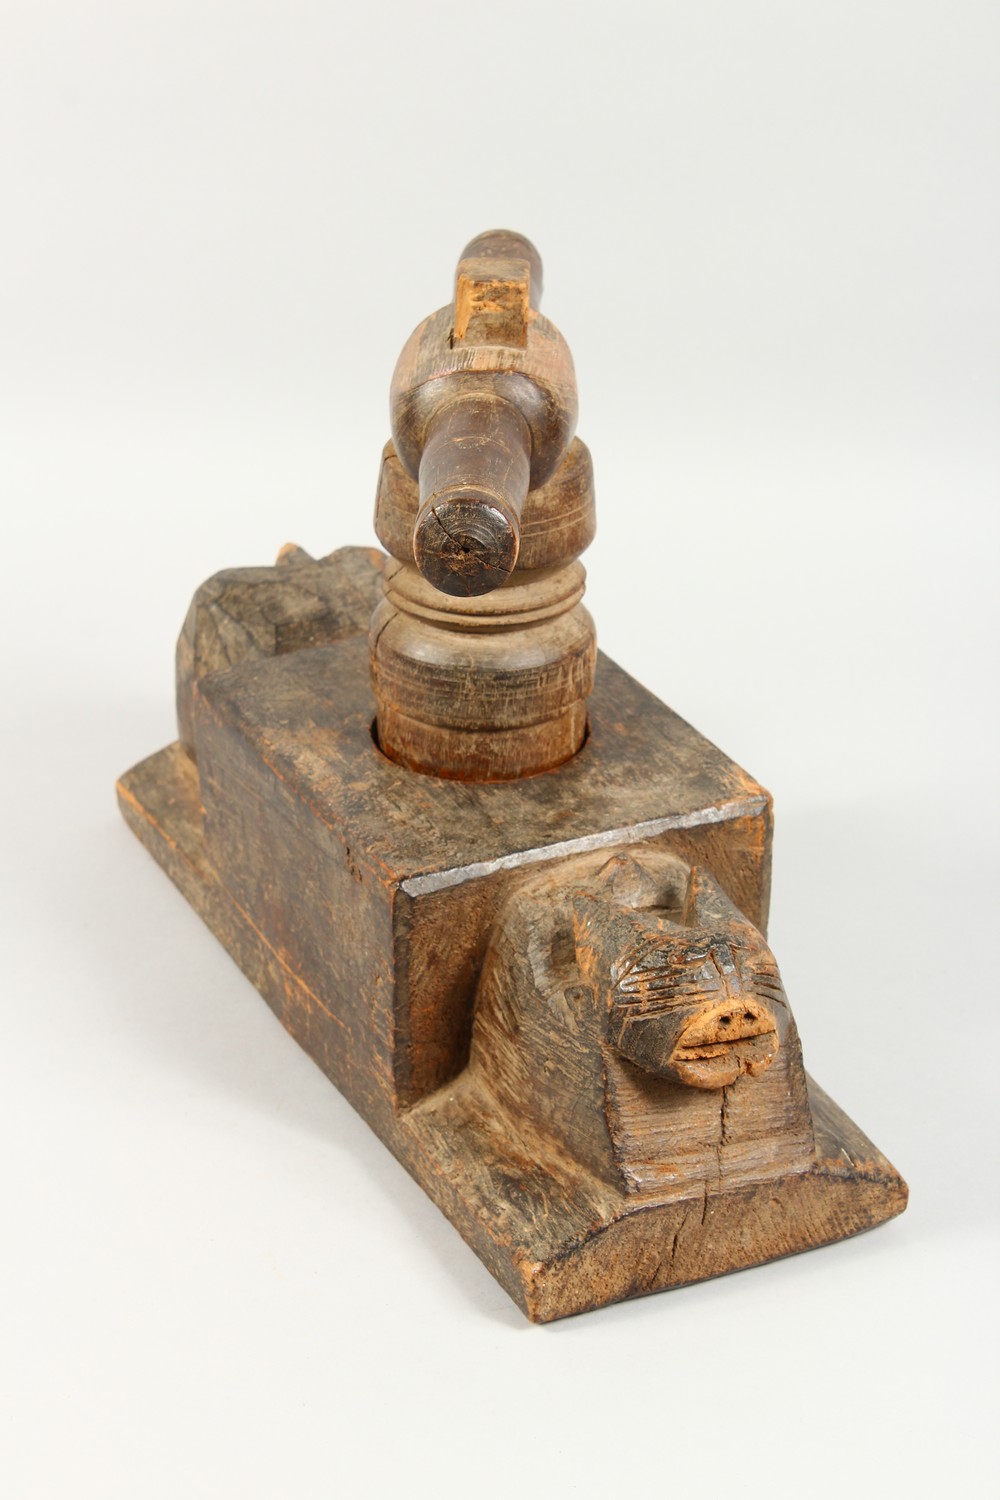 AN UNUSUAL AFRICAN CARVED WOOD FIGURAL TWIN-HANDLED PESTLE AND MORTAR. 15ins long. - Image 4 of 7